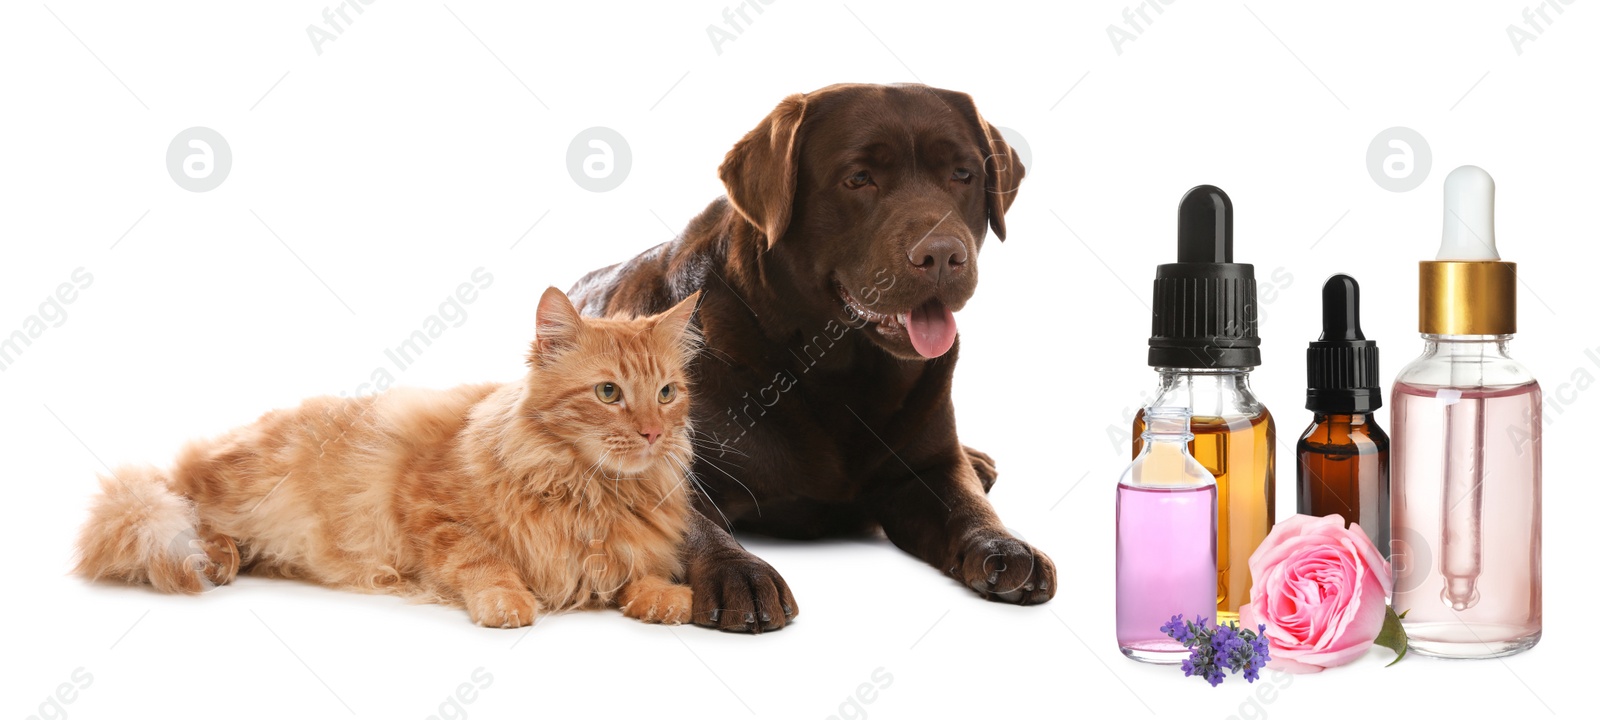 Image of Aromatherapy for animals. Essential oils near dog and cat on white background, banner design